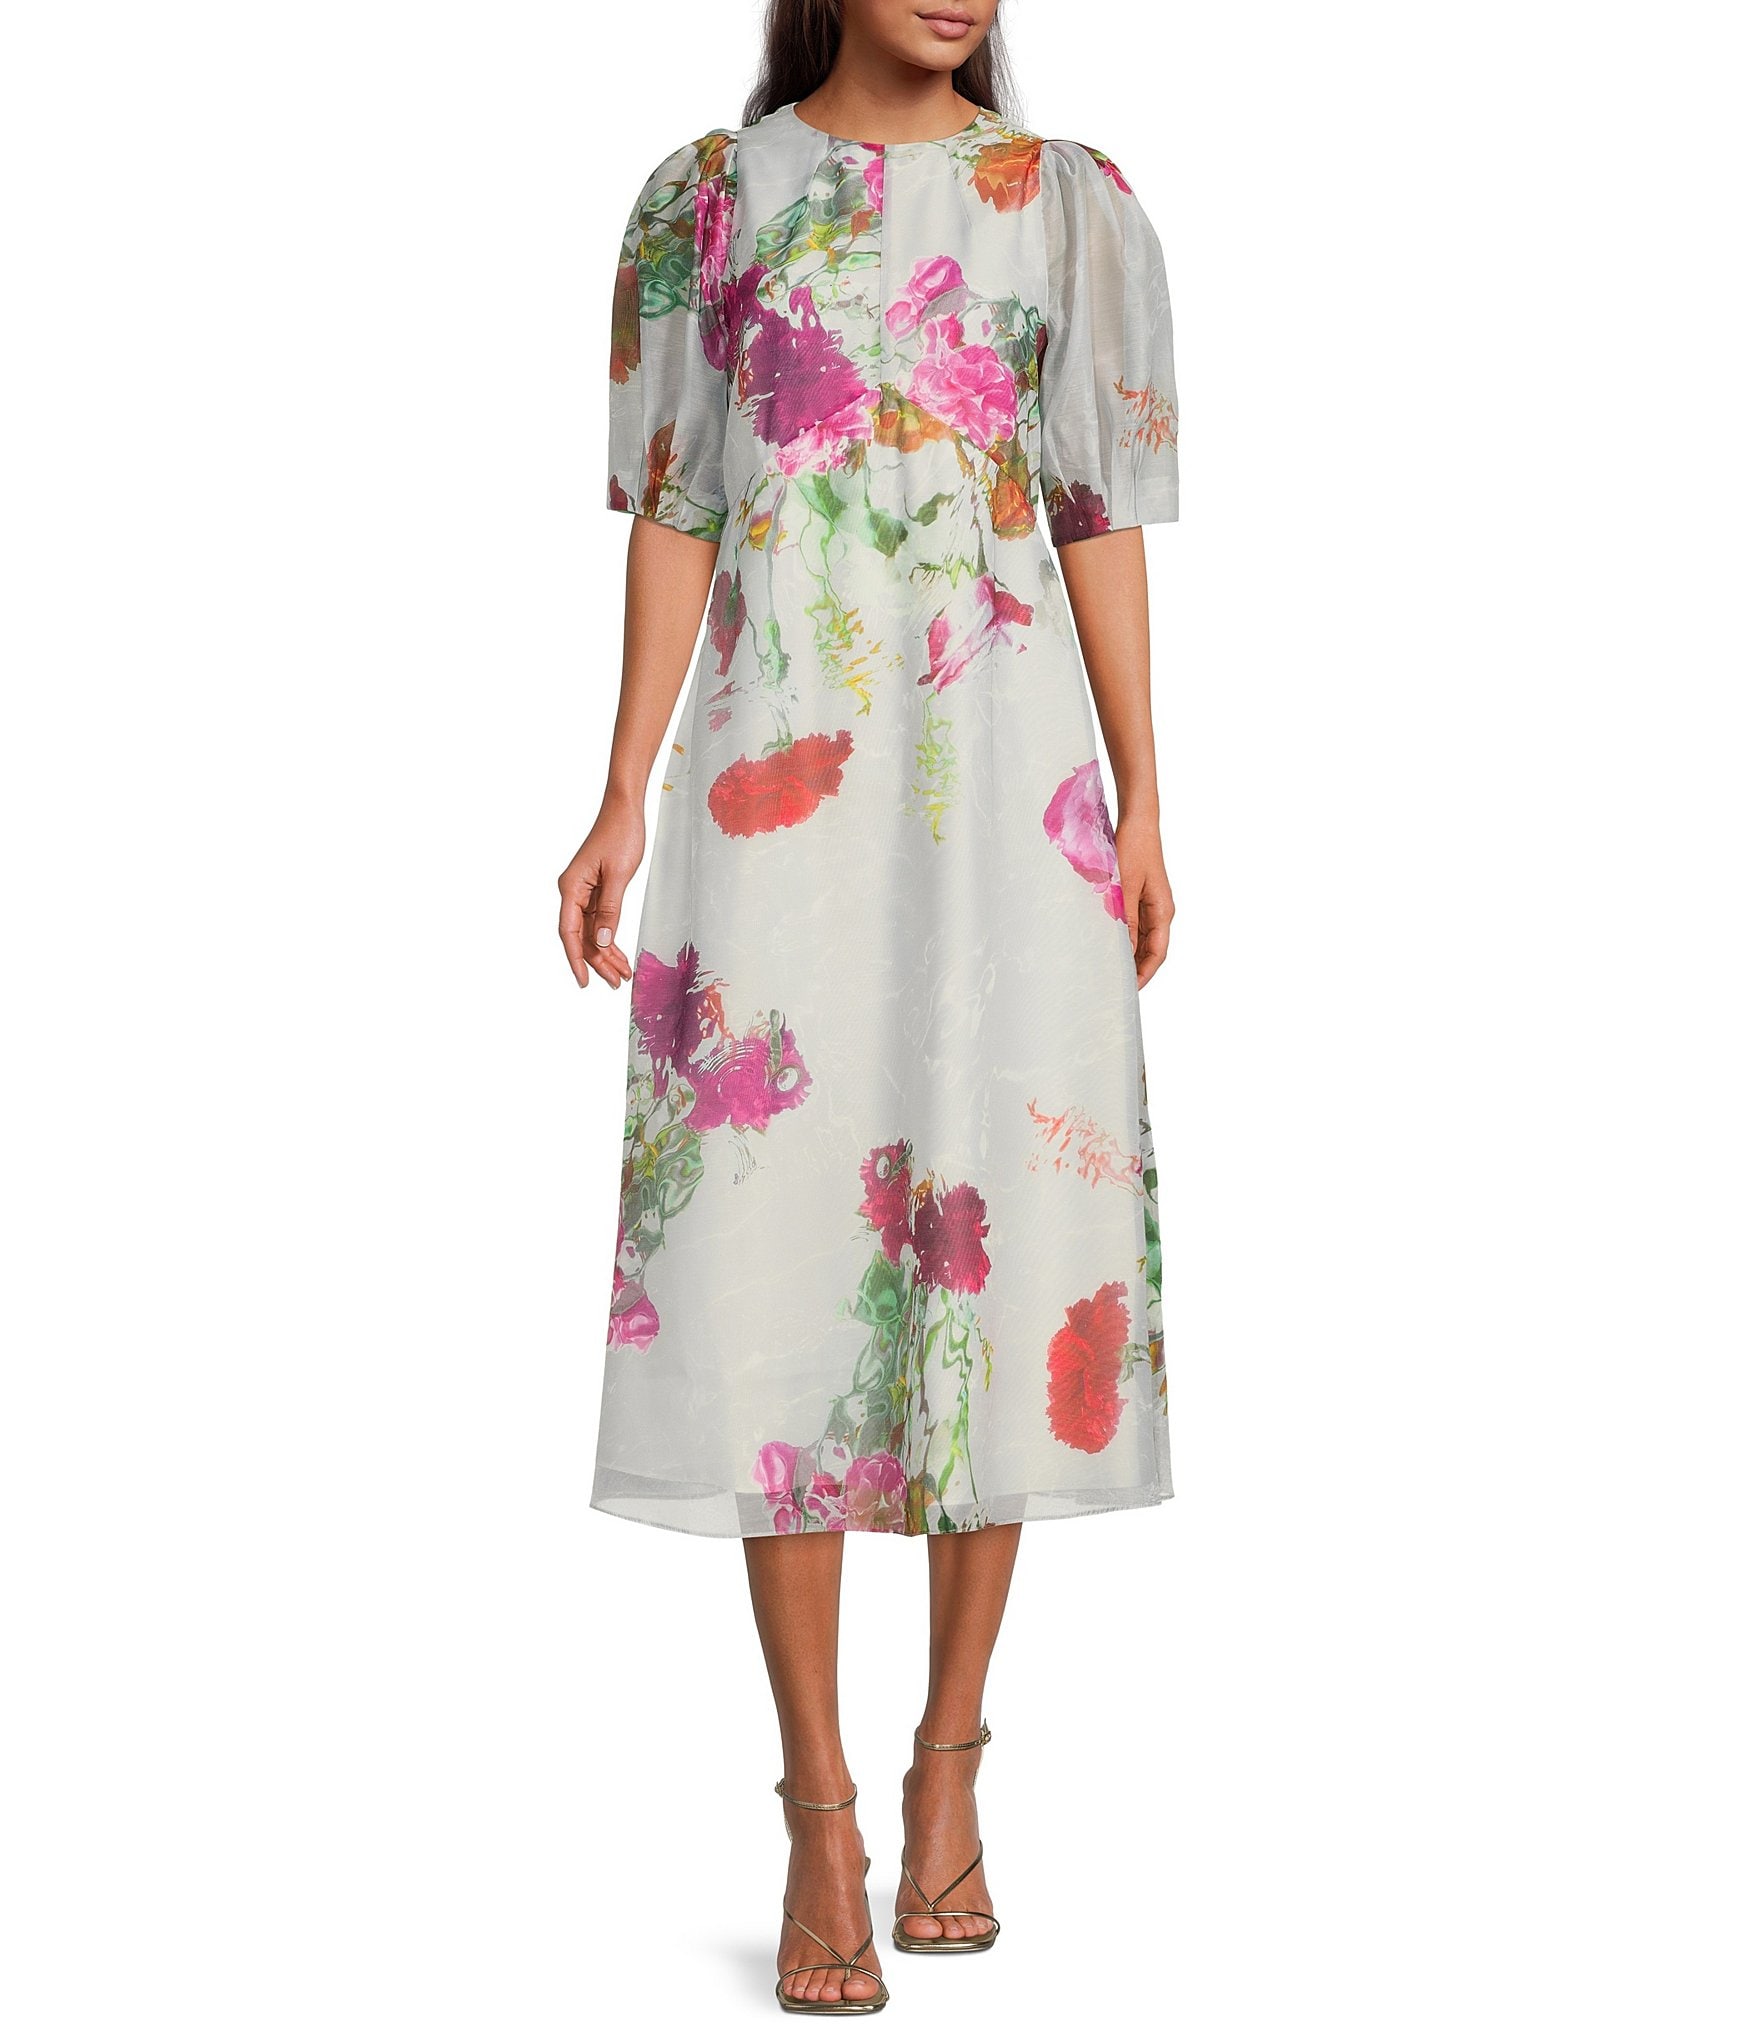 Janeti Dress by Ted Baker London for $45 - $60 | Rent the Runway